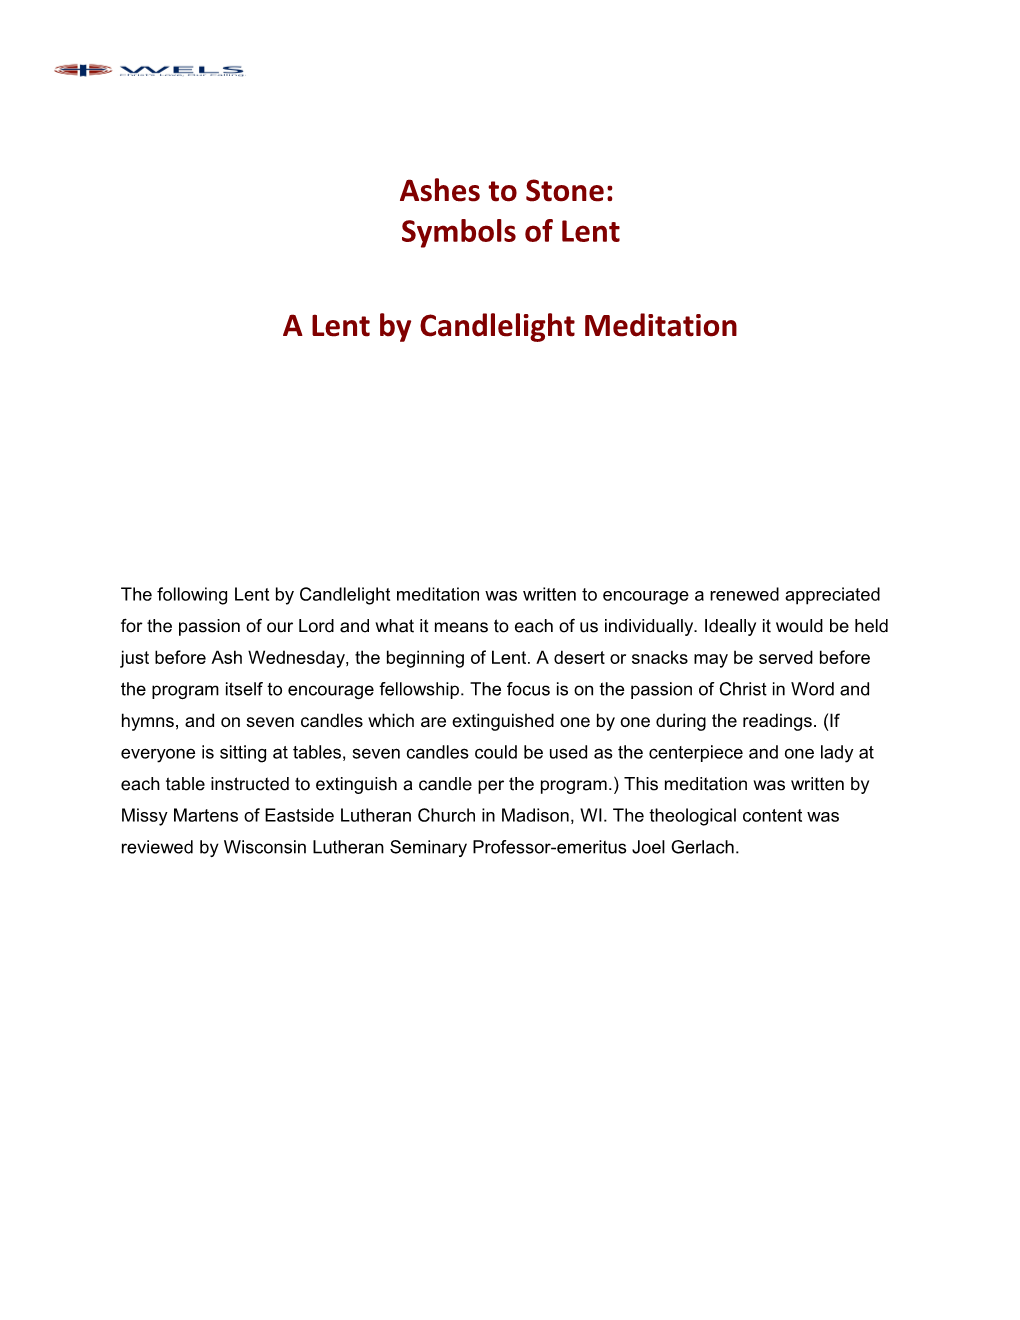 A Lent by Candlelight Meditation